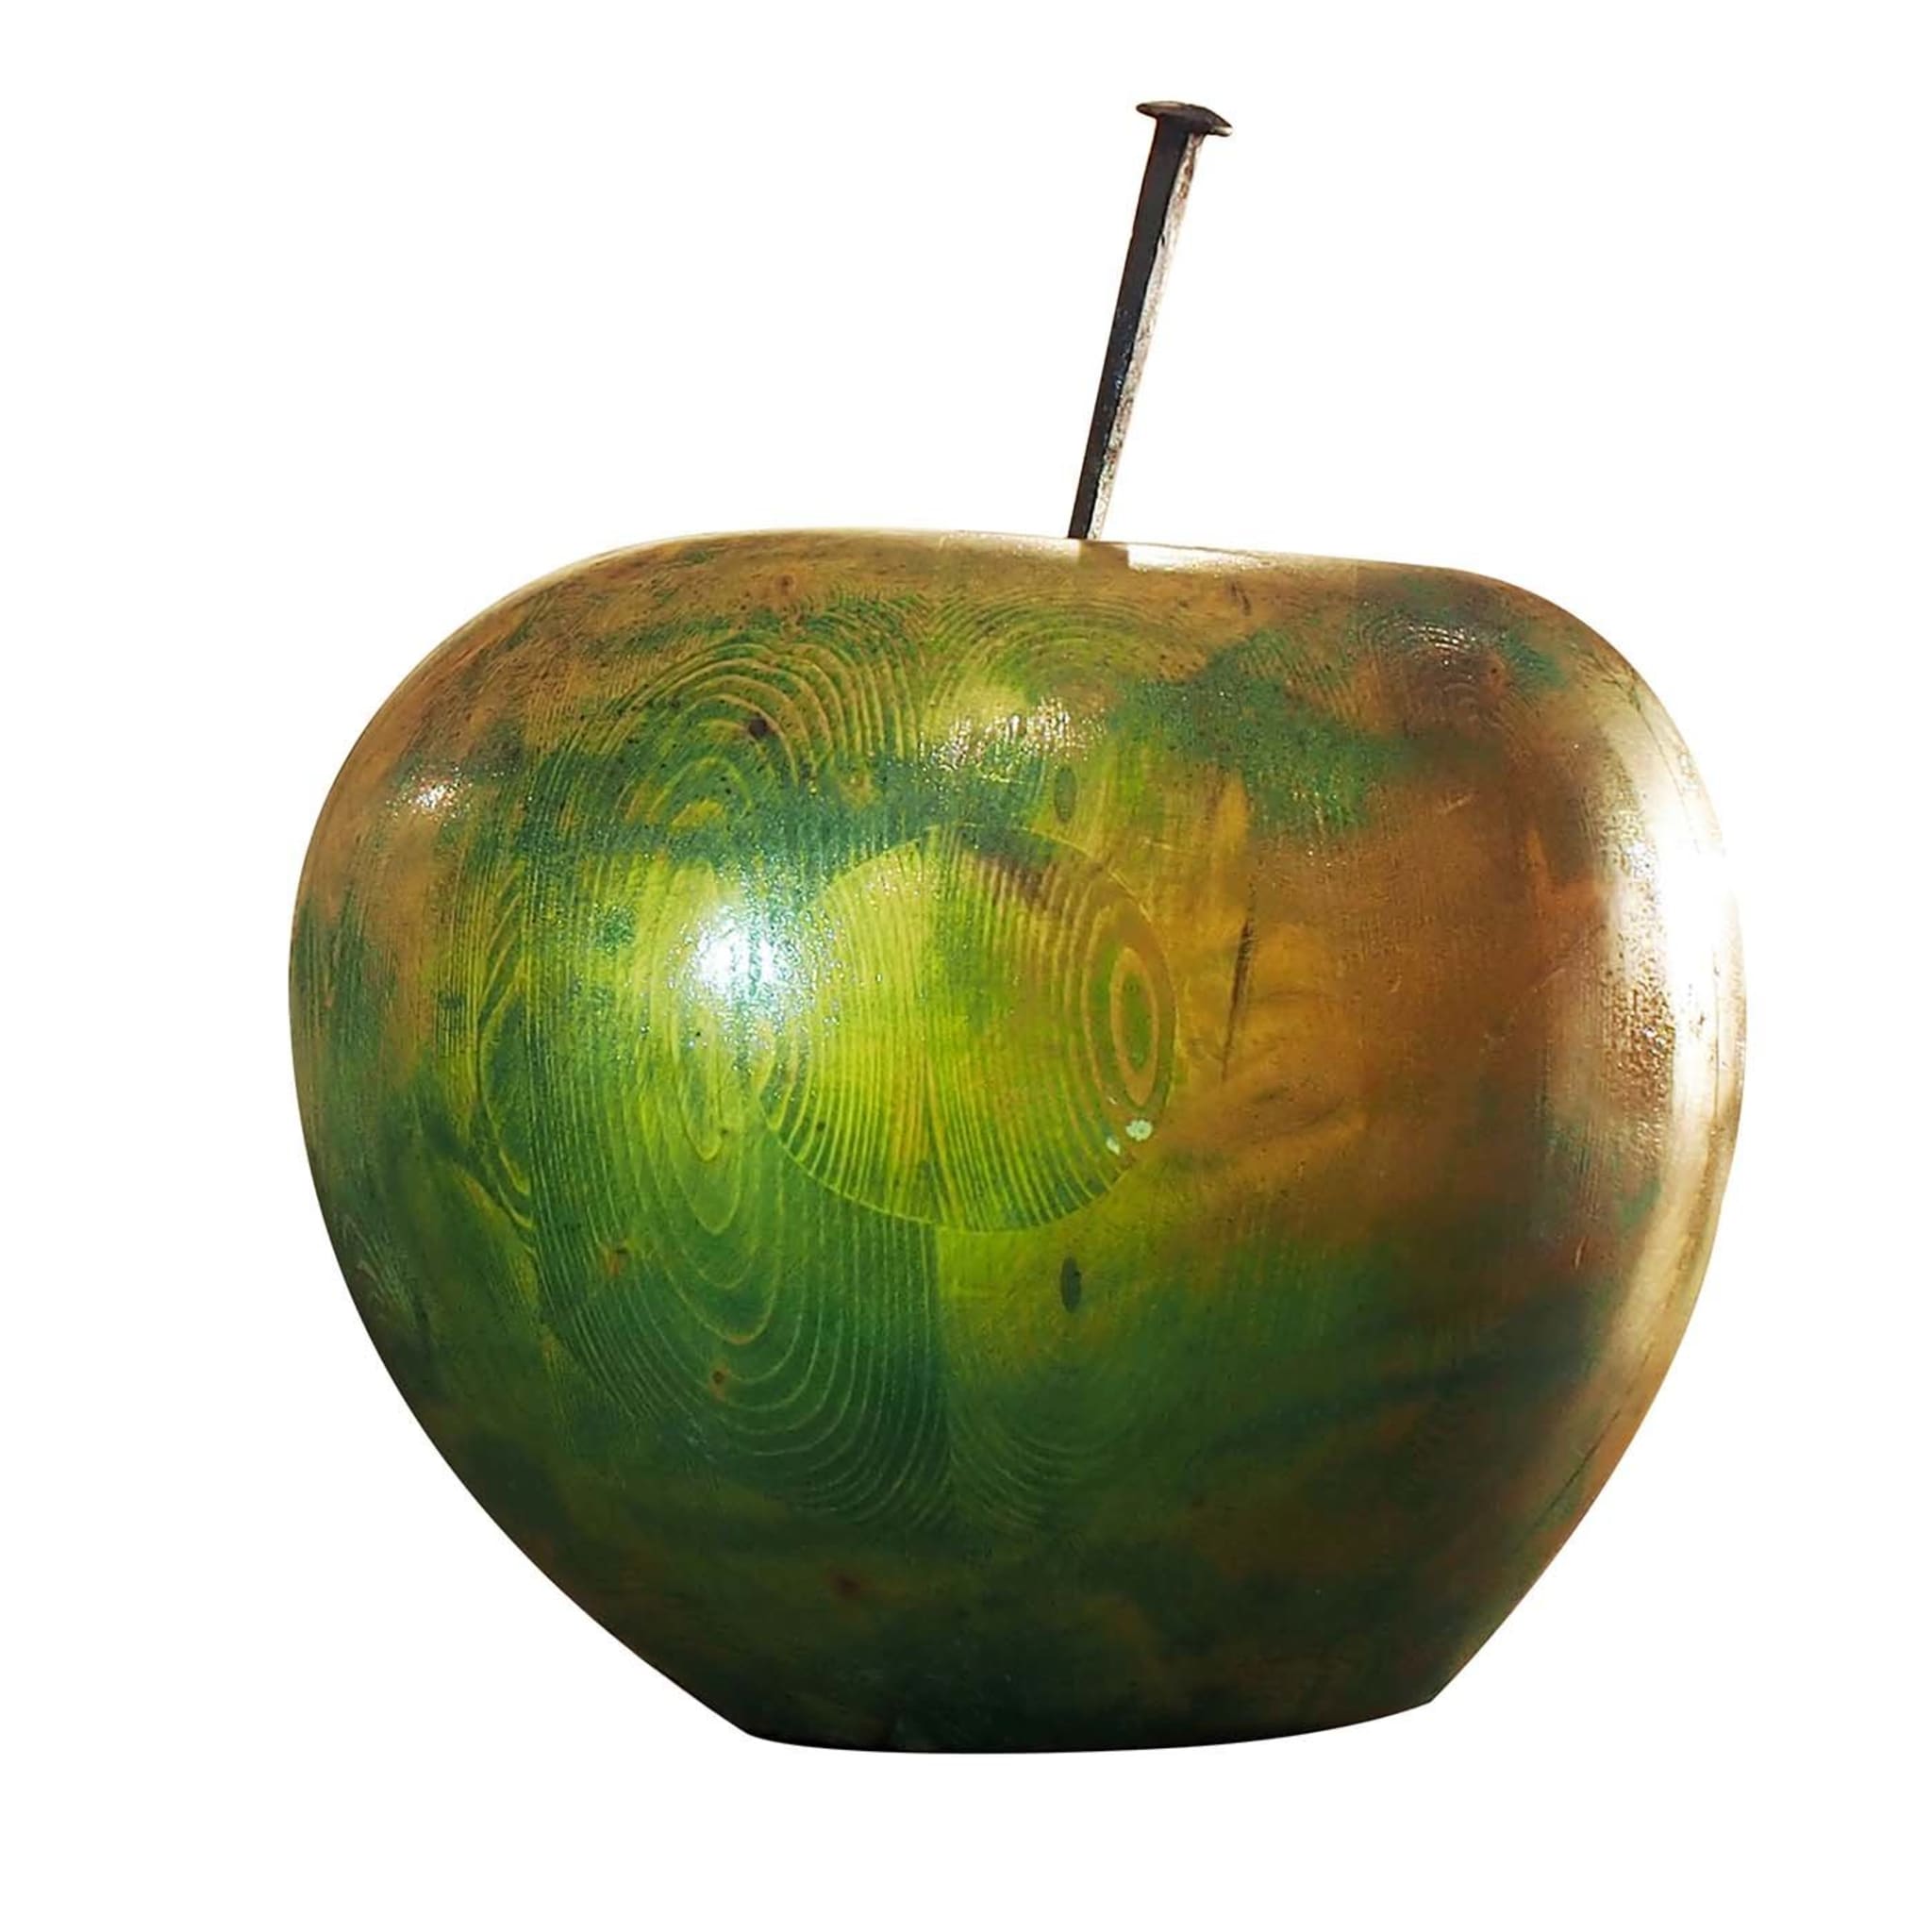 Faded Green Apple - Main view